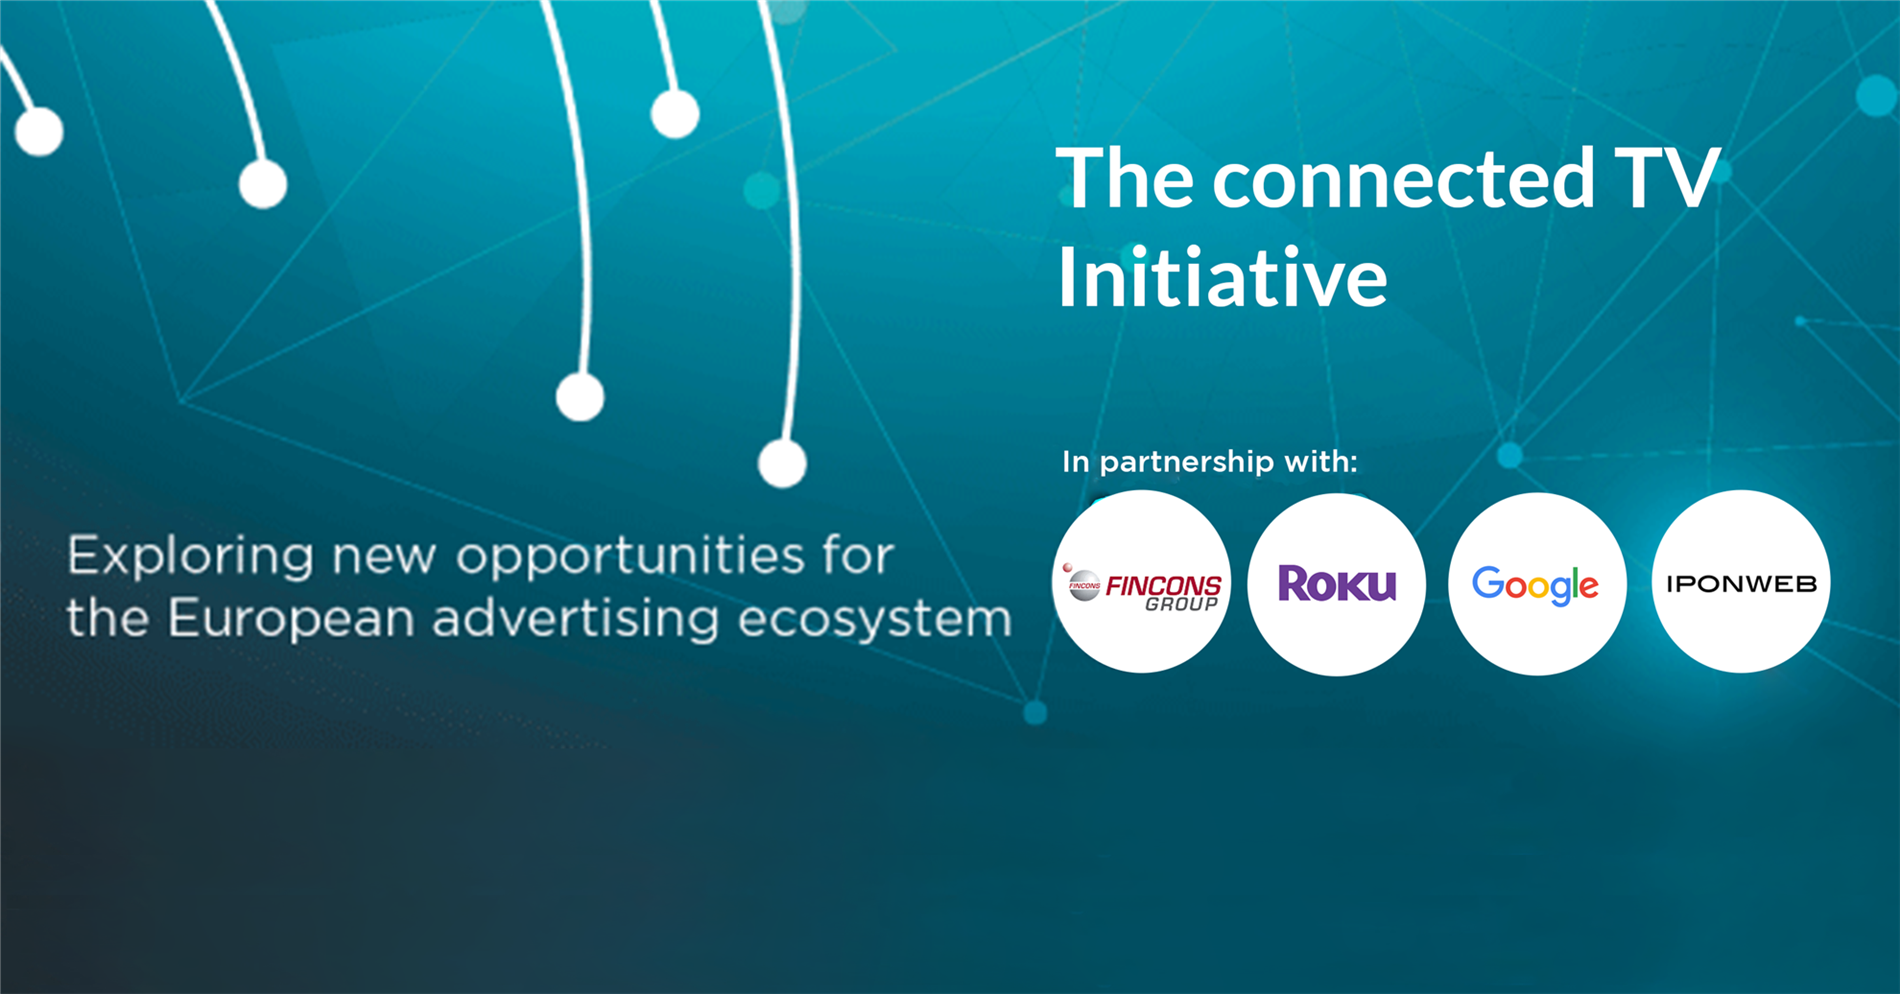 Fincons Group sponsors European Connected TV Initiative with Google, Roku and IPONWEB